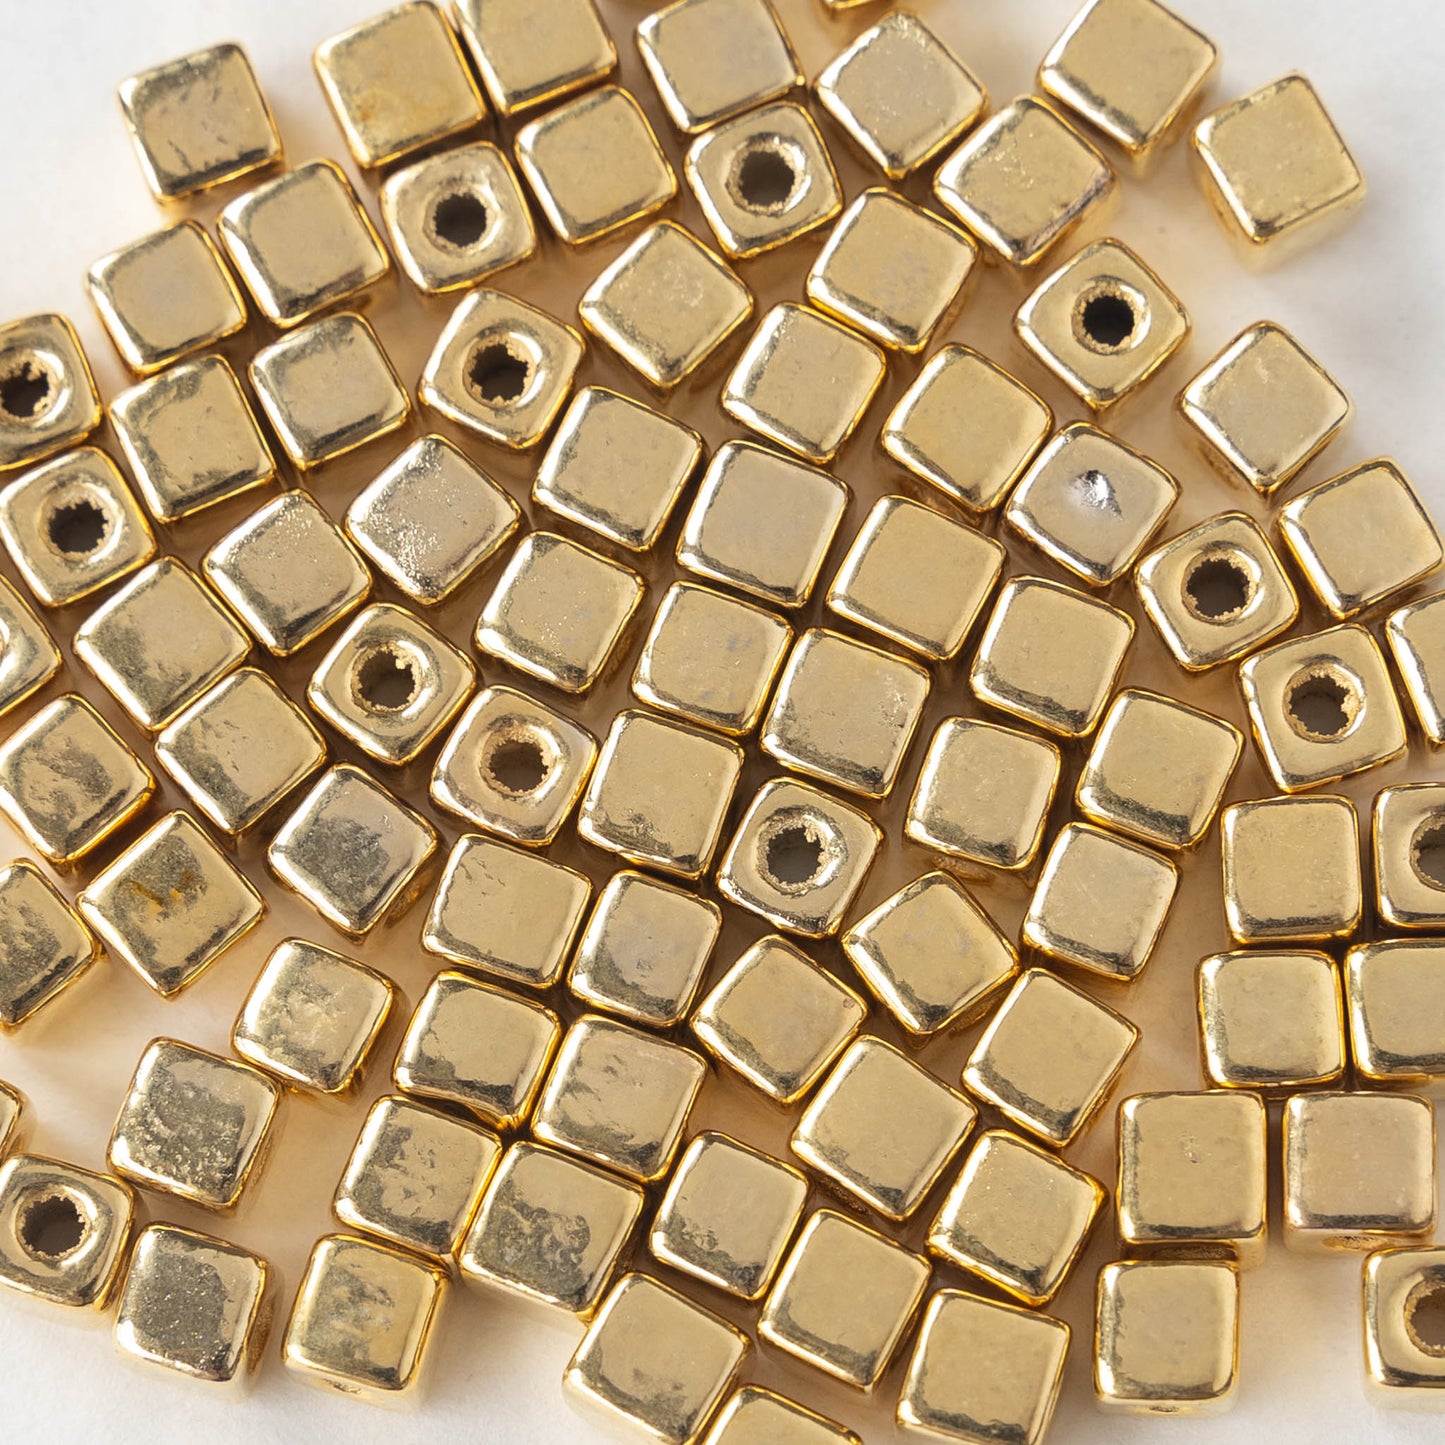 5.5mm 24K Gold Coated Ceramic Cube Beads - Gold - 10 or 30